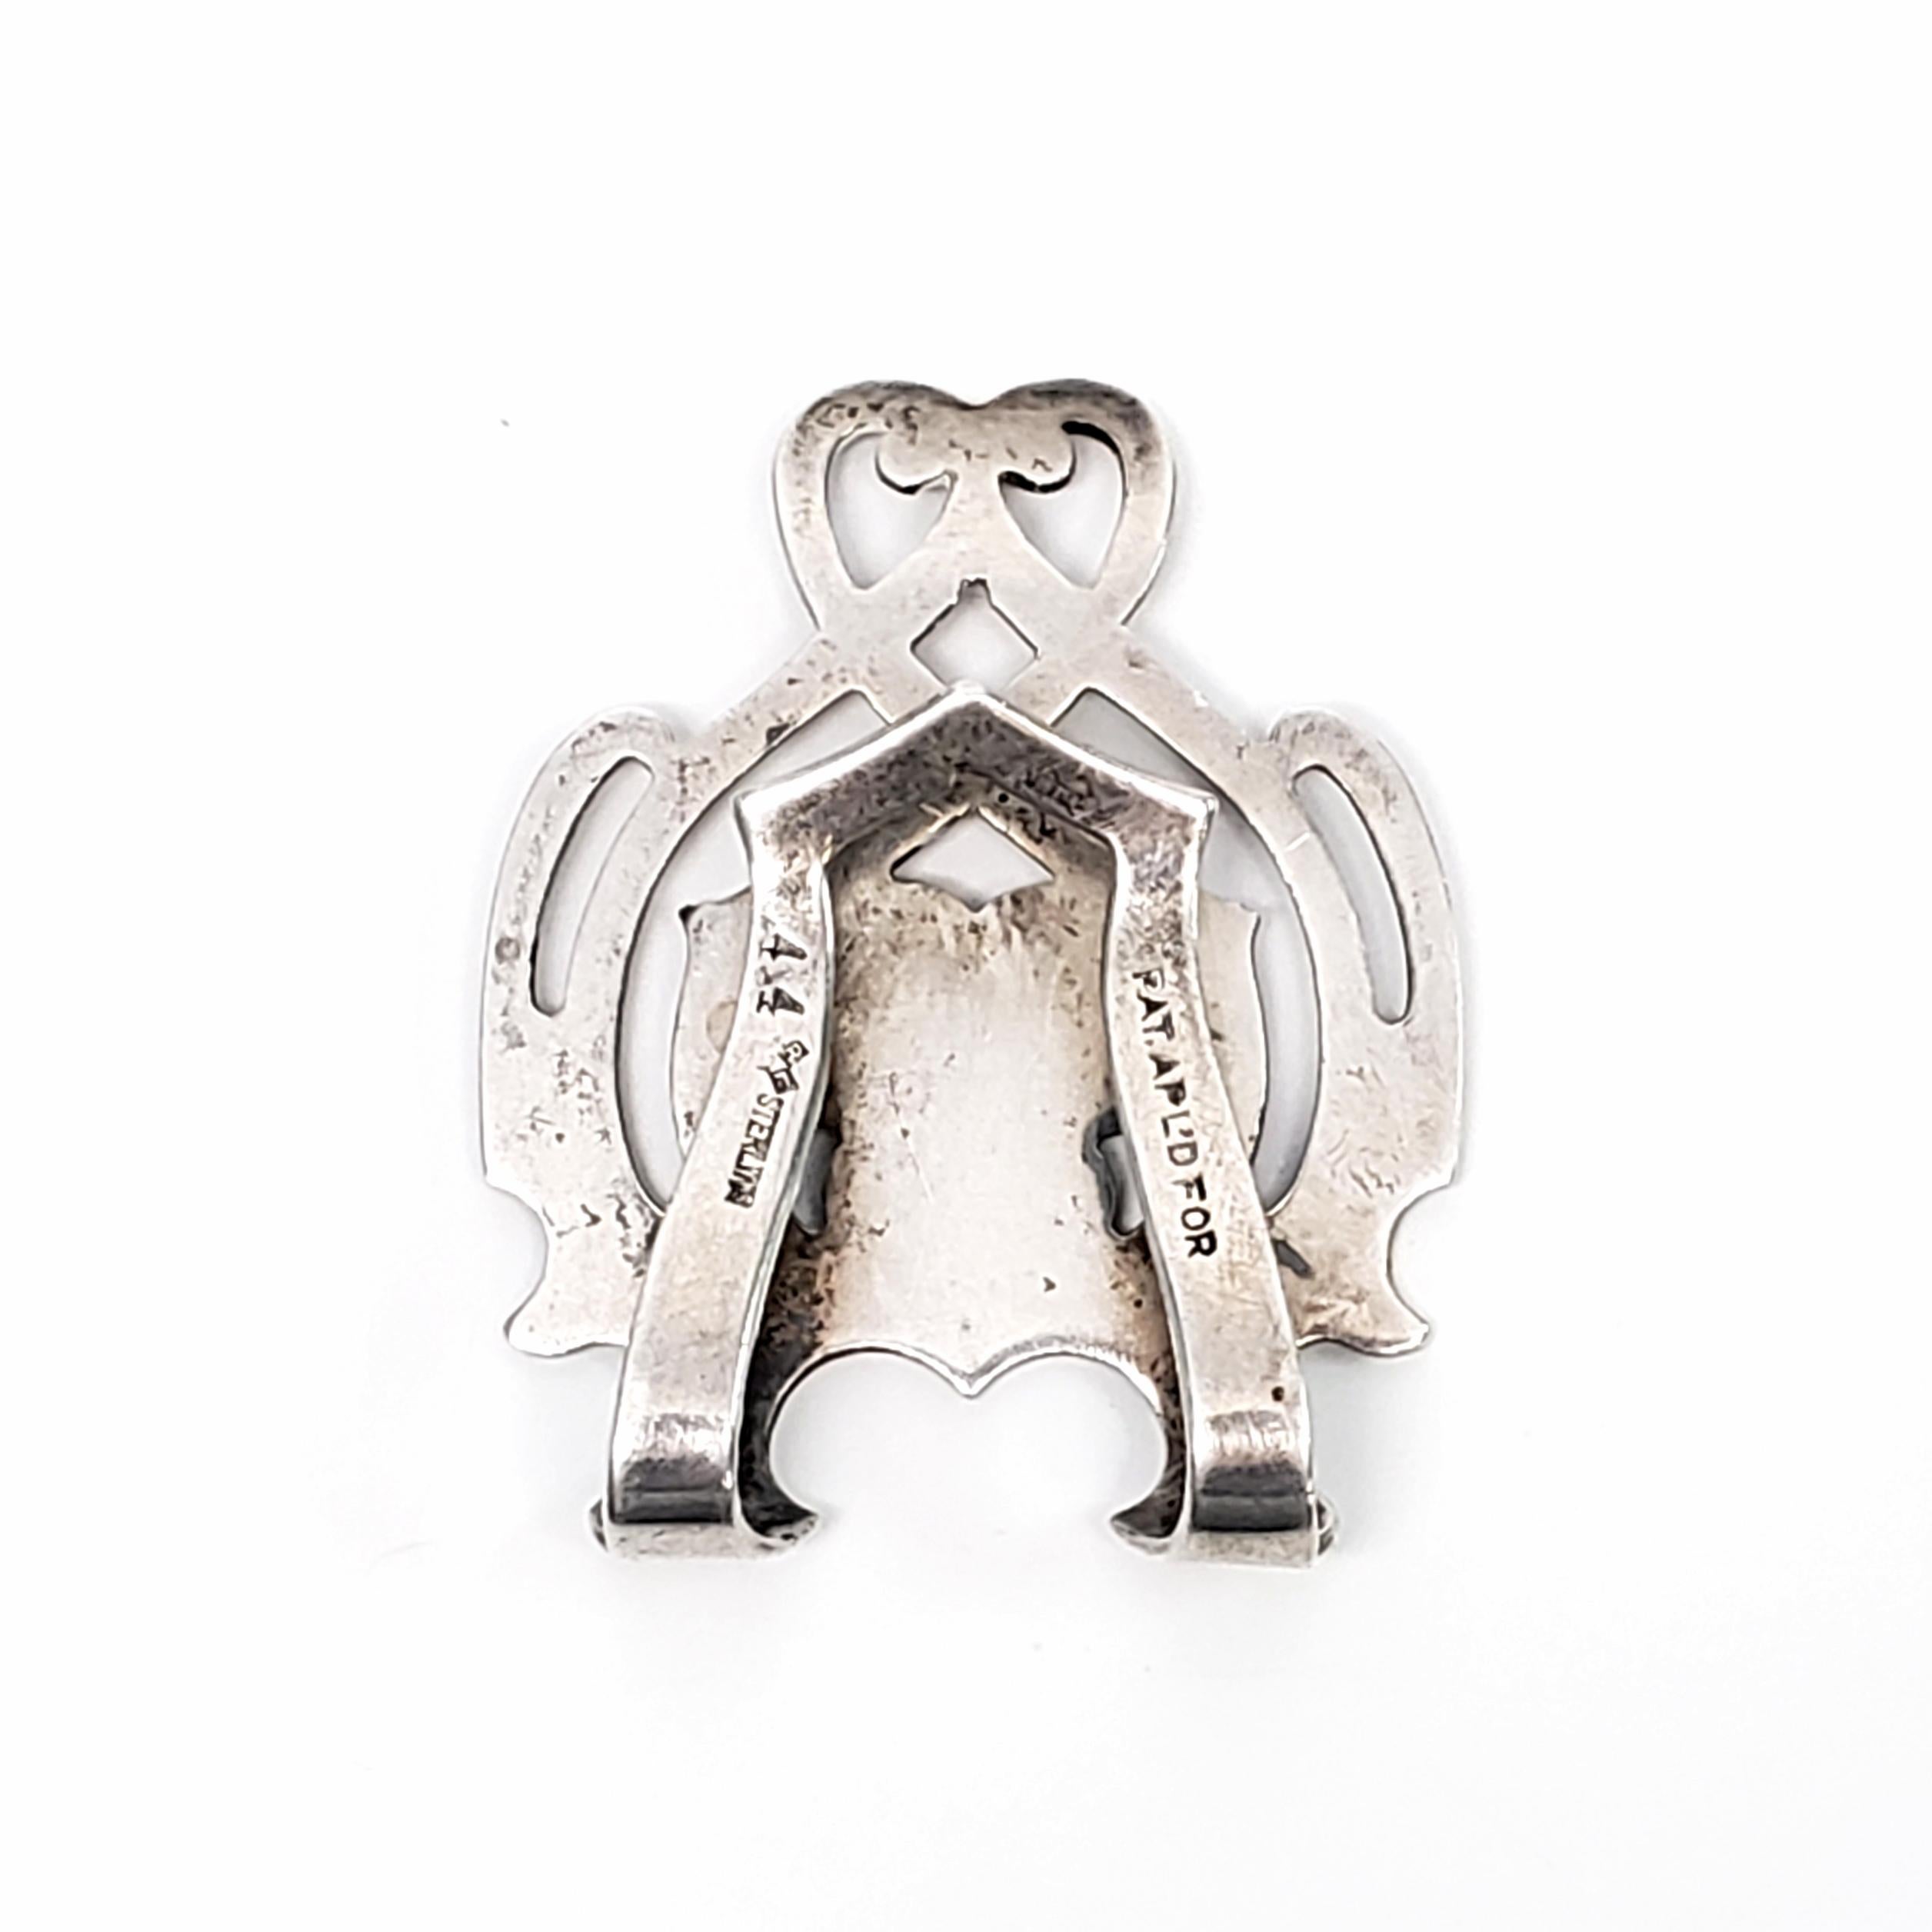 Vintage sterling silver napkin clip by Rogers, Lunt & Bowlen Co, #44.

Engraved with the name Susie.

Cut-out scroll design by Rogers, Lunt & Bowlen, incorporated in 1902 in Greenfield, MA. The RLB hallmark dates the piece to